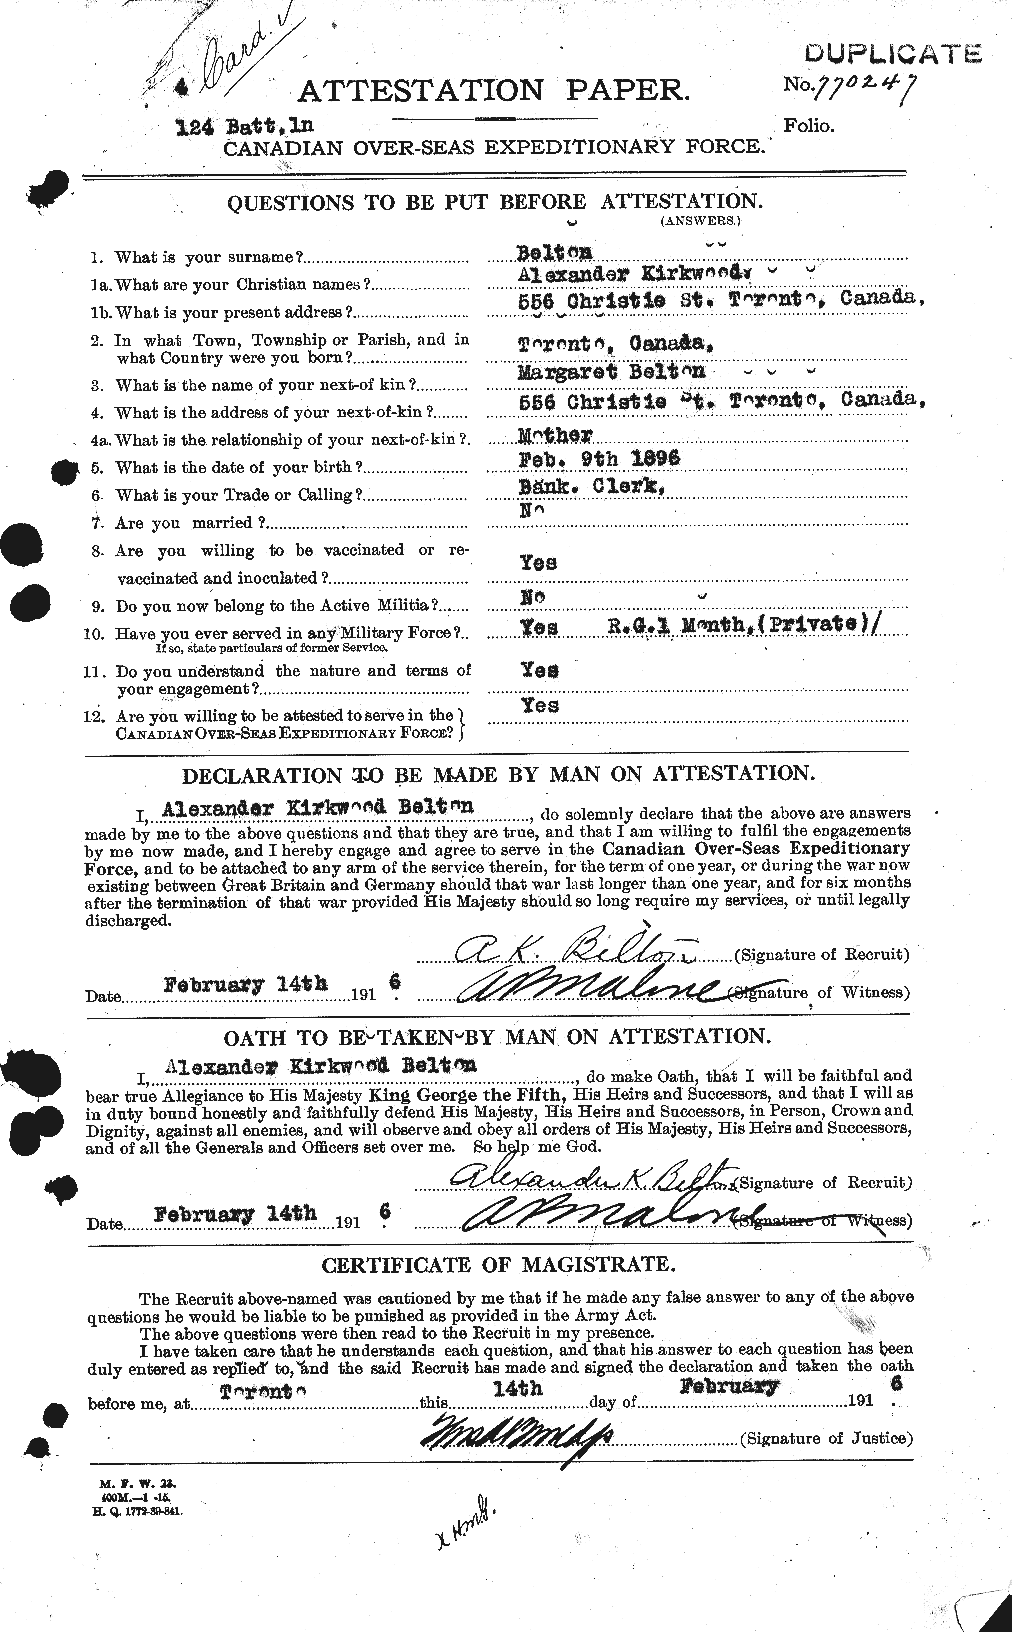 Personnel Records of the First World War - CEF 233648a